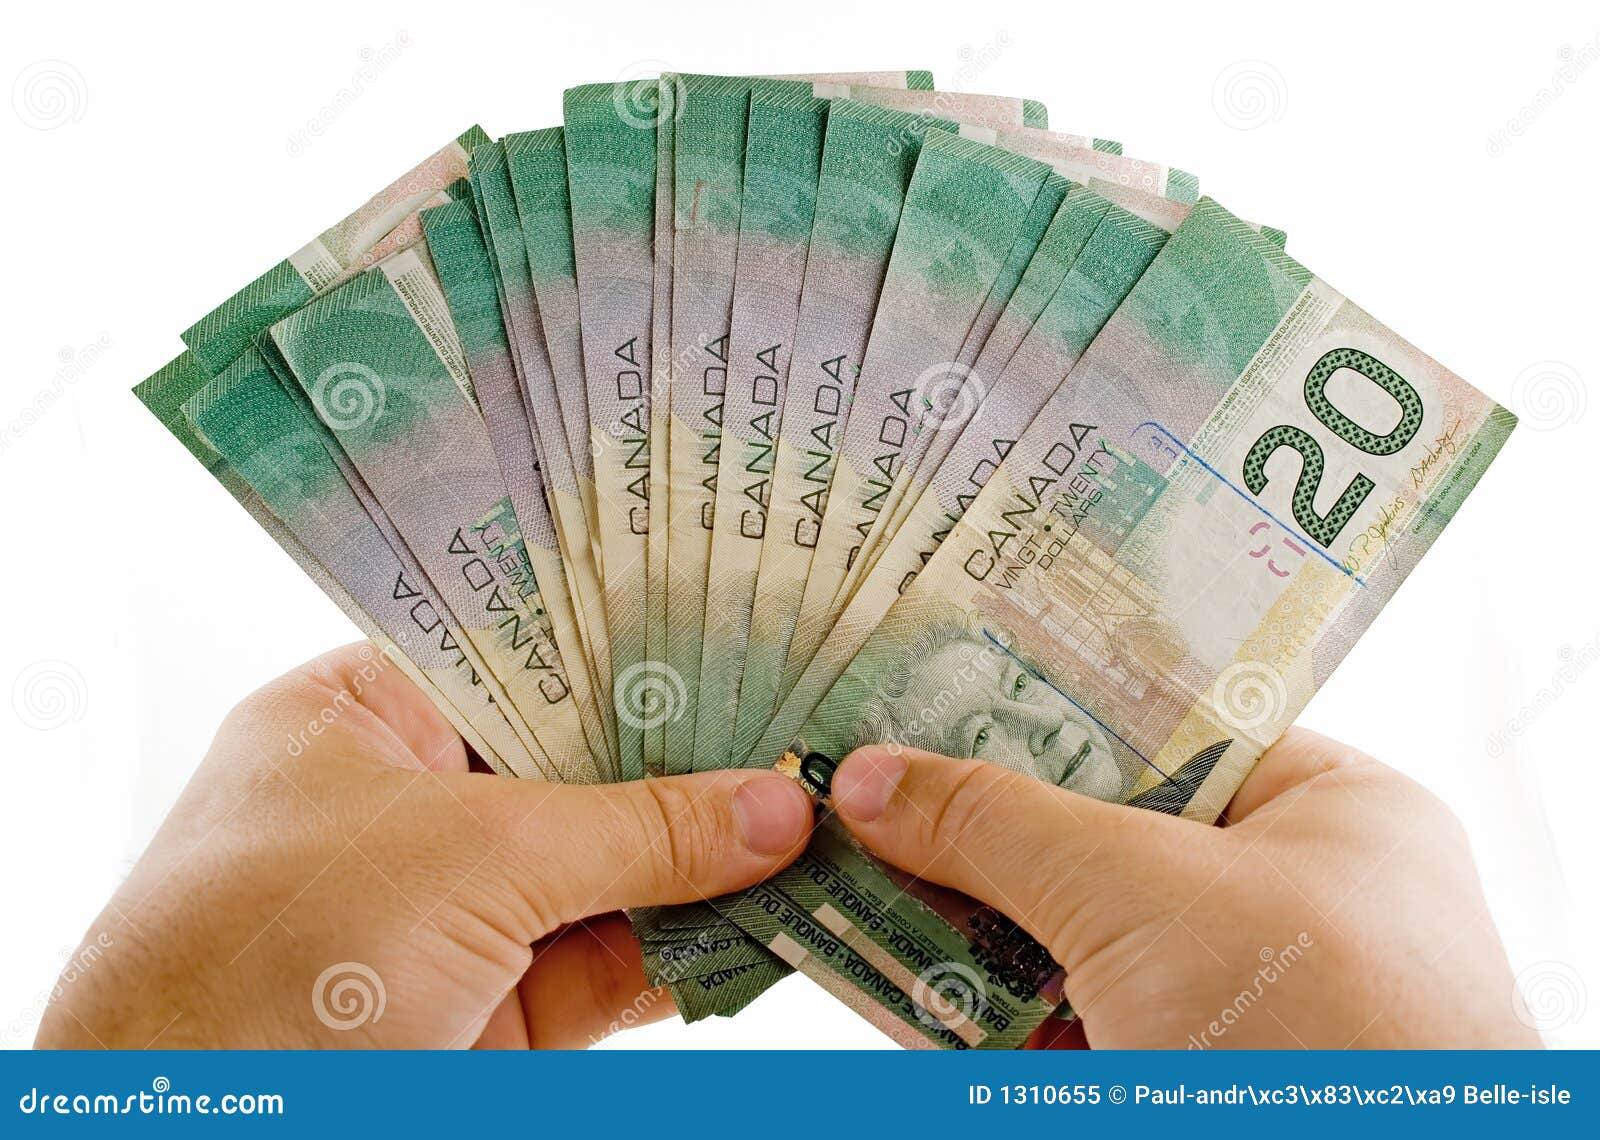 clipart of canadian money - photo #48